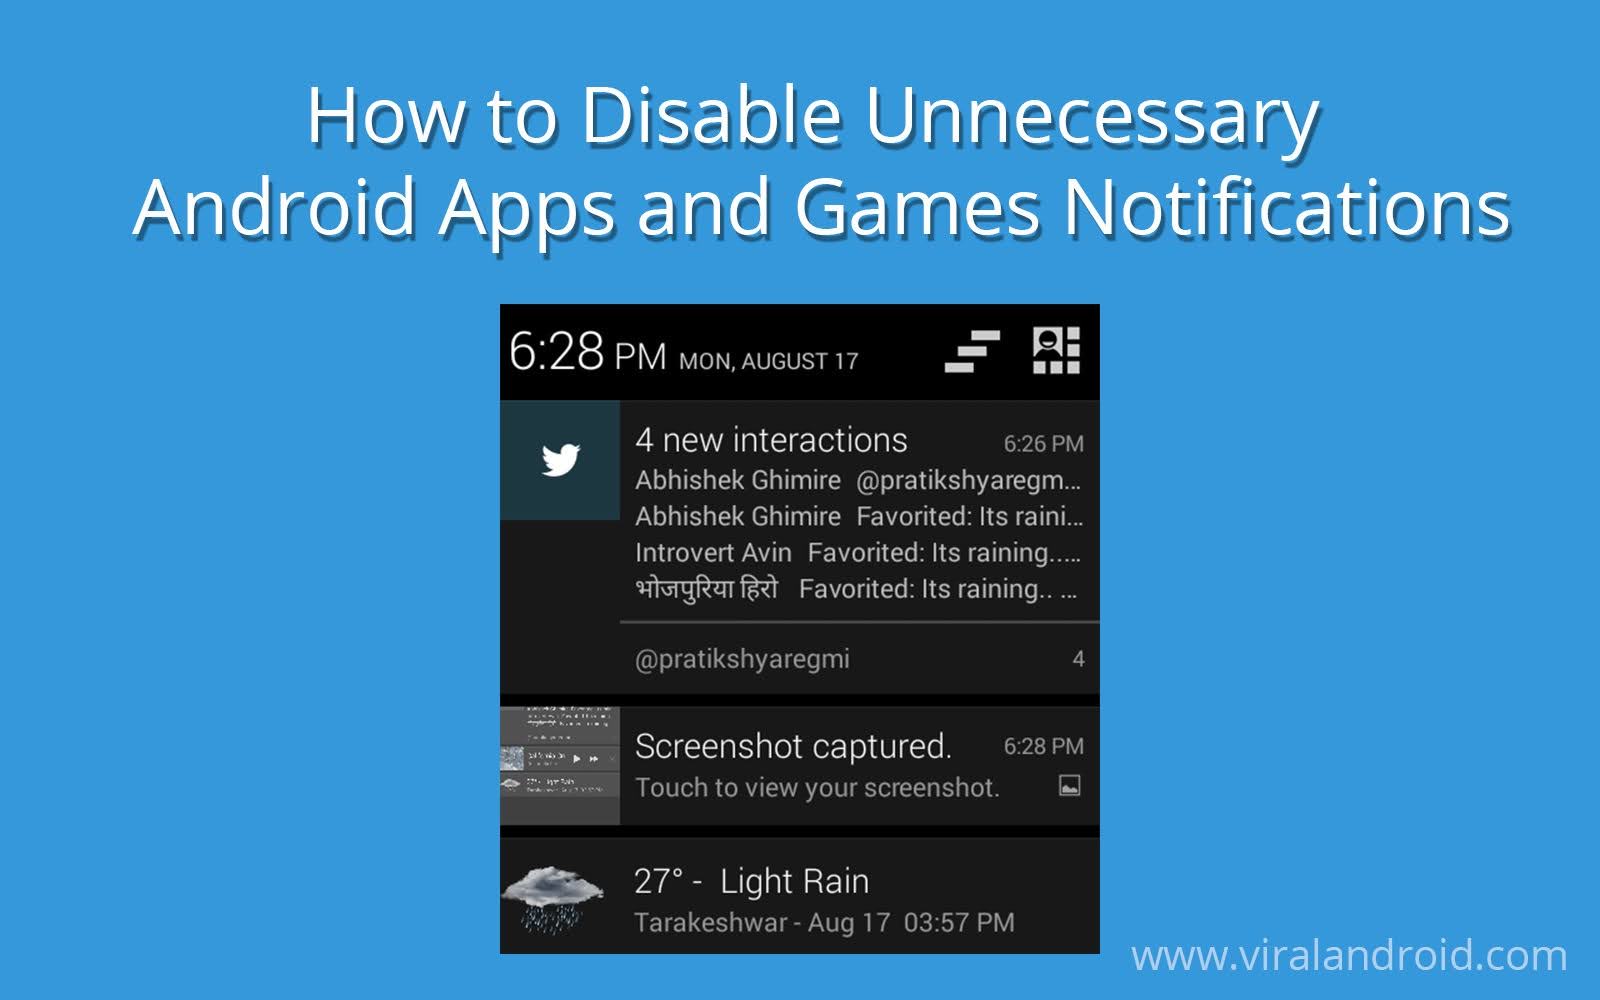 How To Disable Unnecrssary Android Apps and Games Notifications